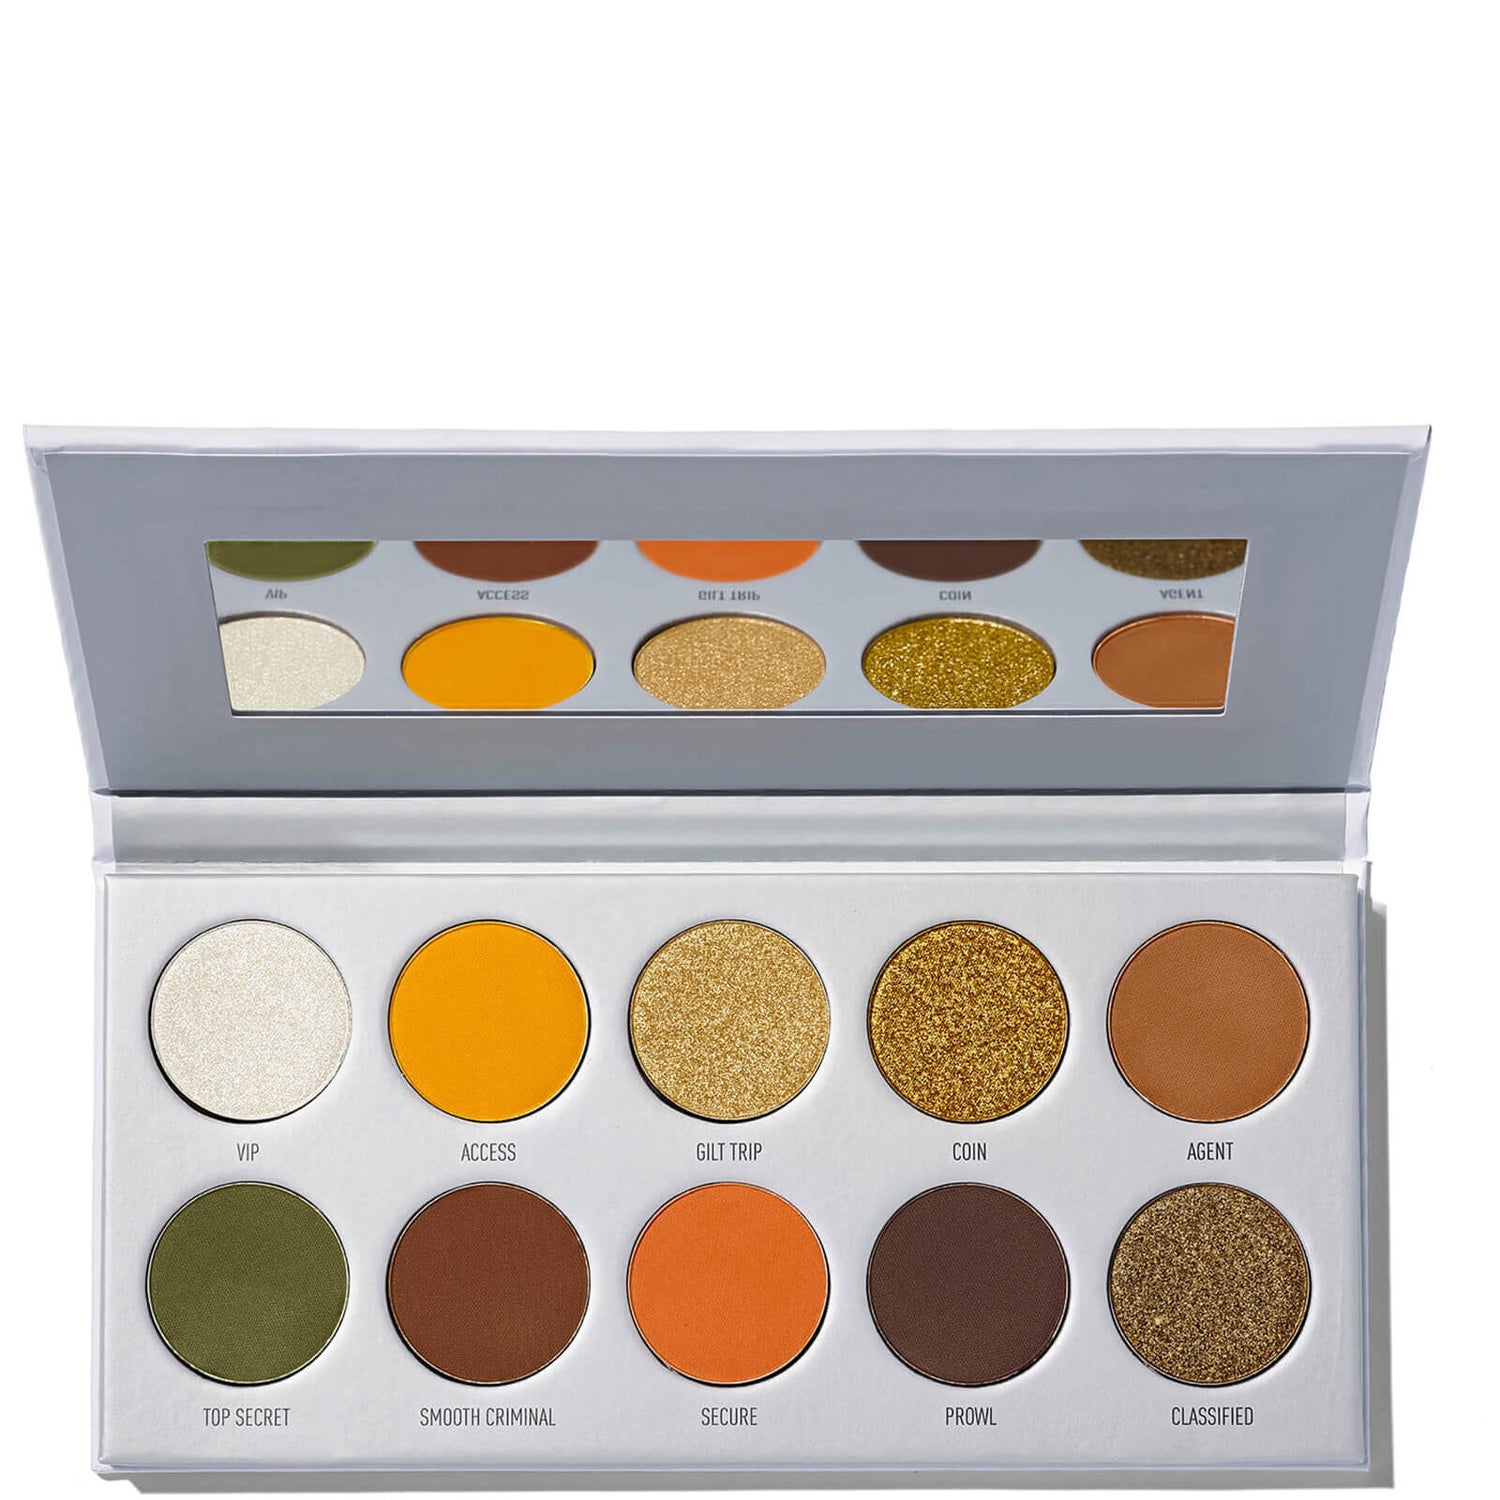 Morphe X Jaclyn Hill Armed and Gorgeous Eye Shadow Palette